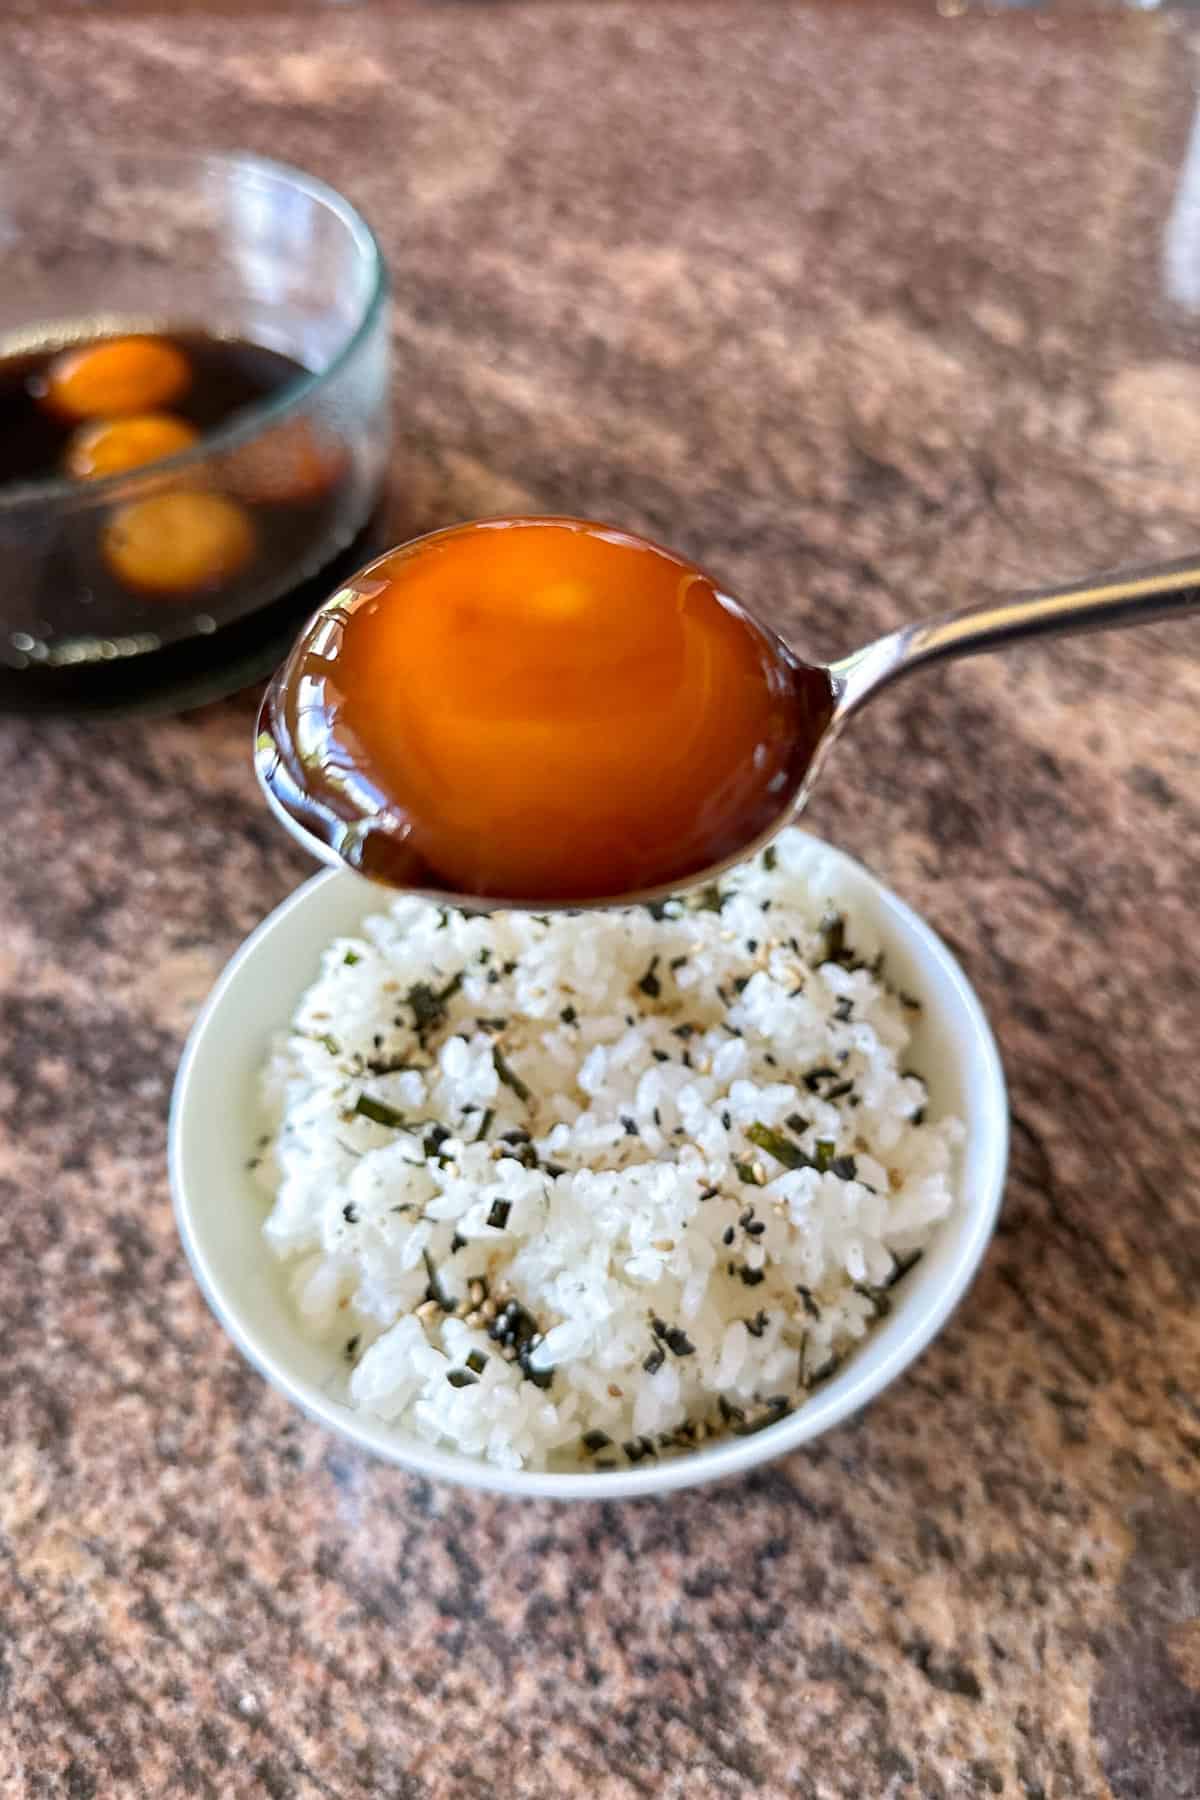 Placing a Soy Cured Egg Yolk on a bowl of rice.